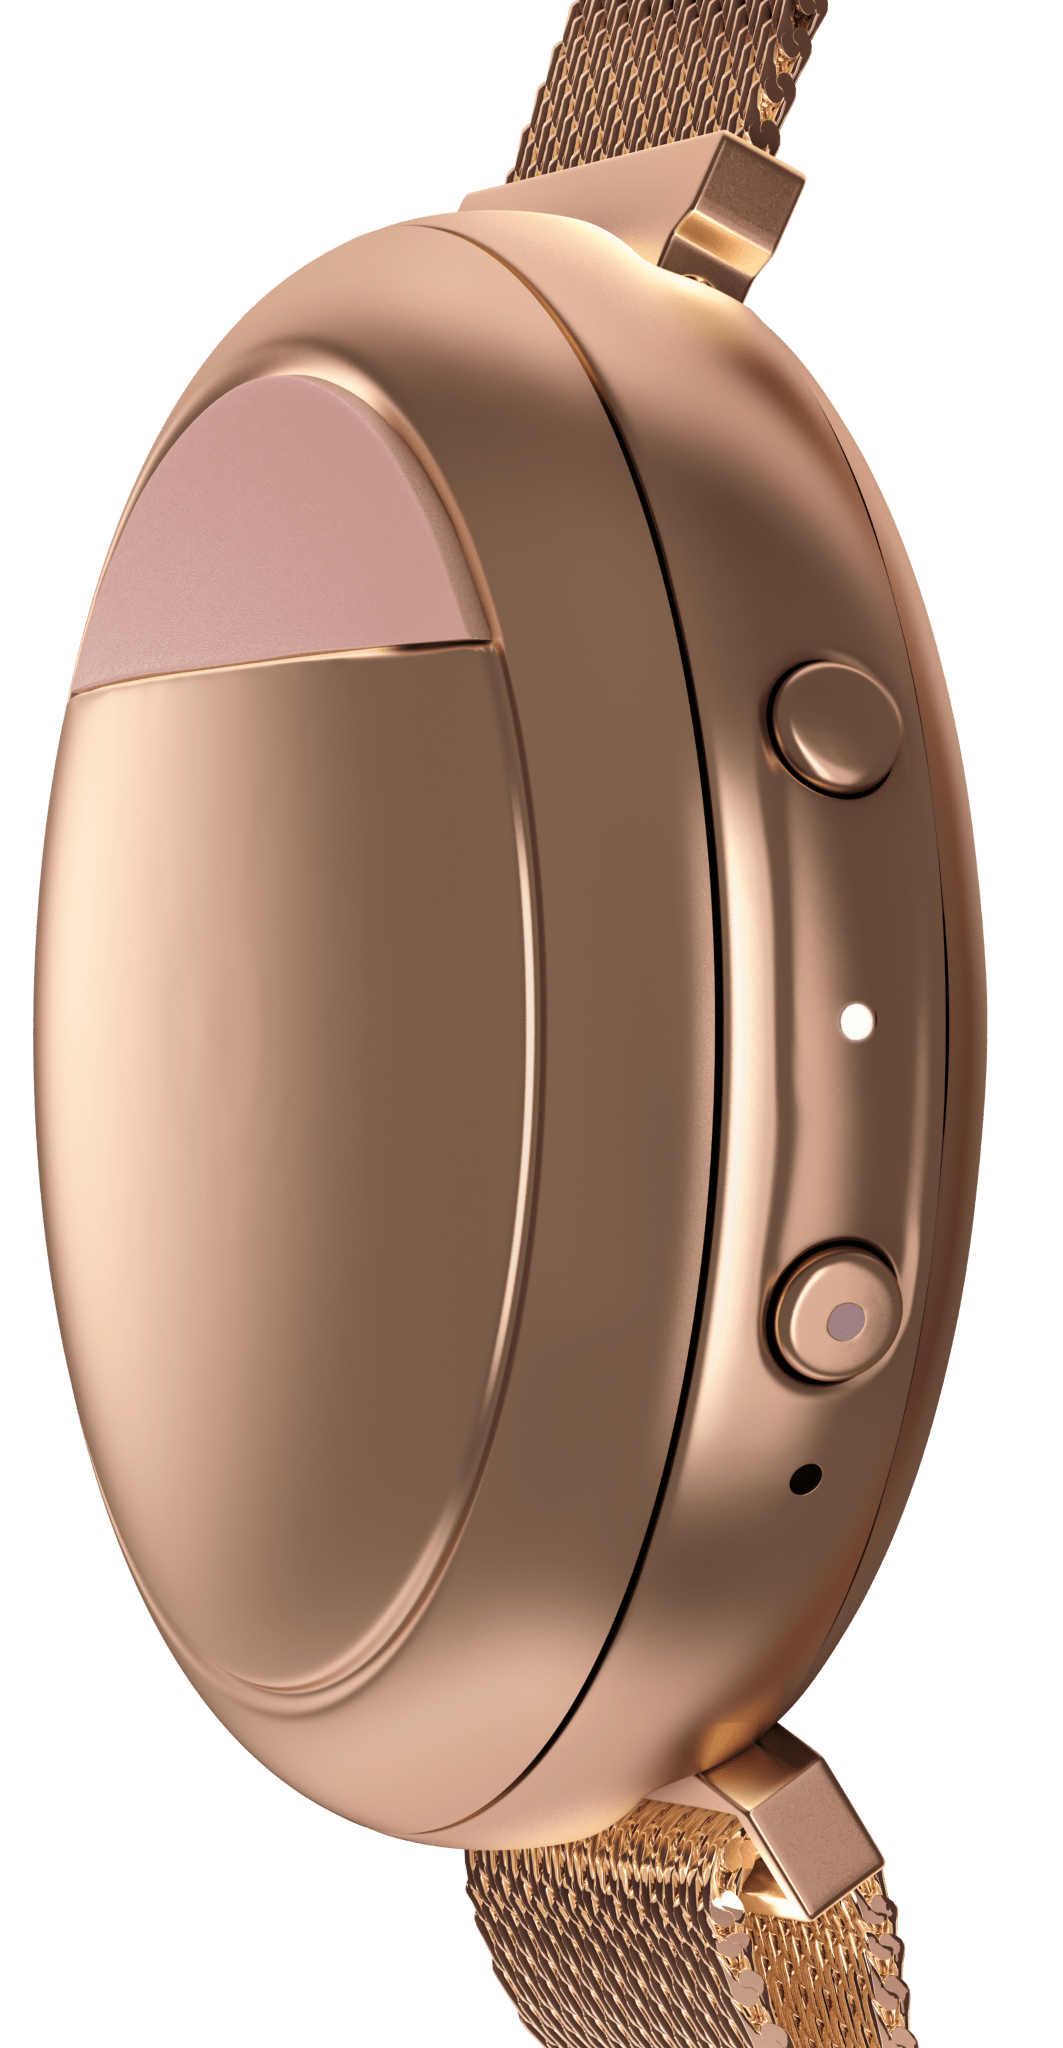 Rose gold smartwatch with a mesh band on a green background.